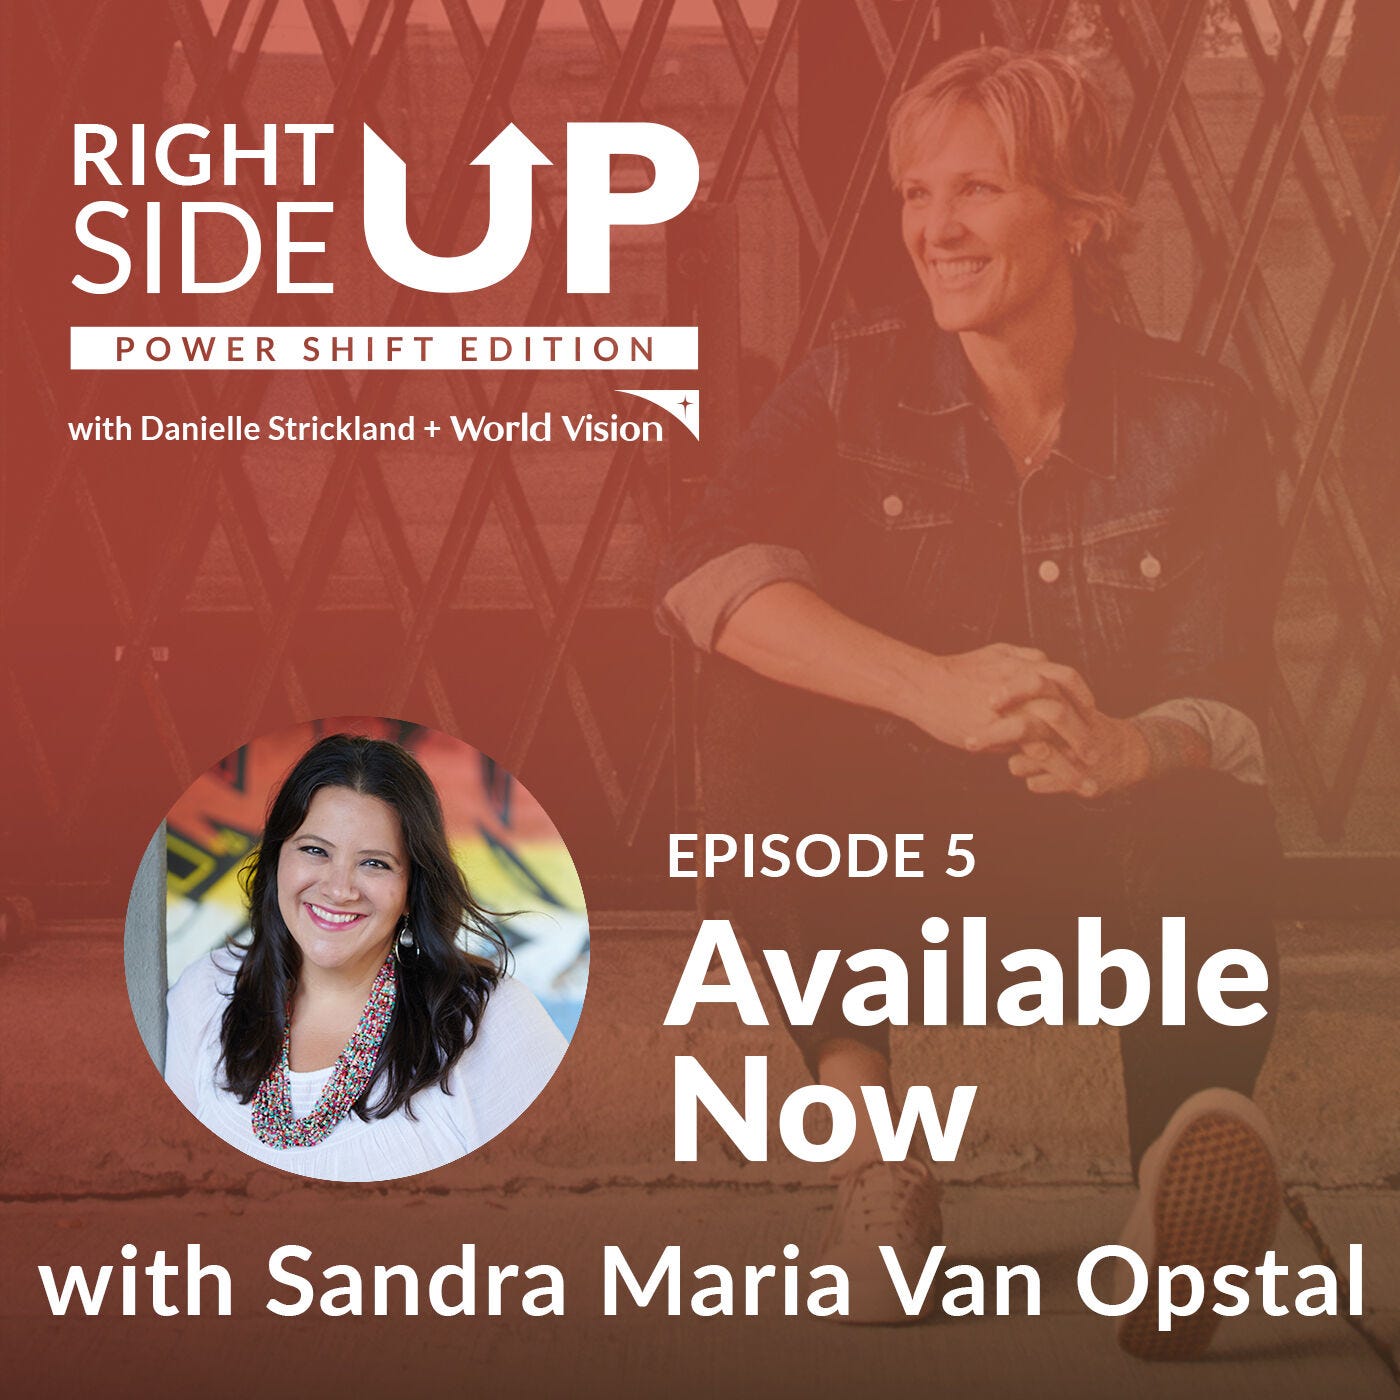 Power Shift Edition: Interview with Sandra Maria Van Opstal